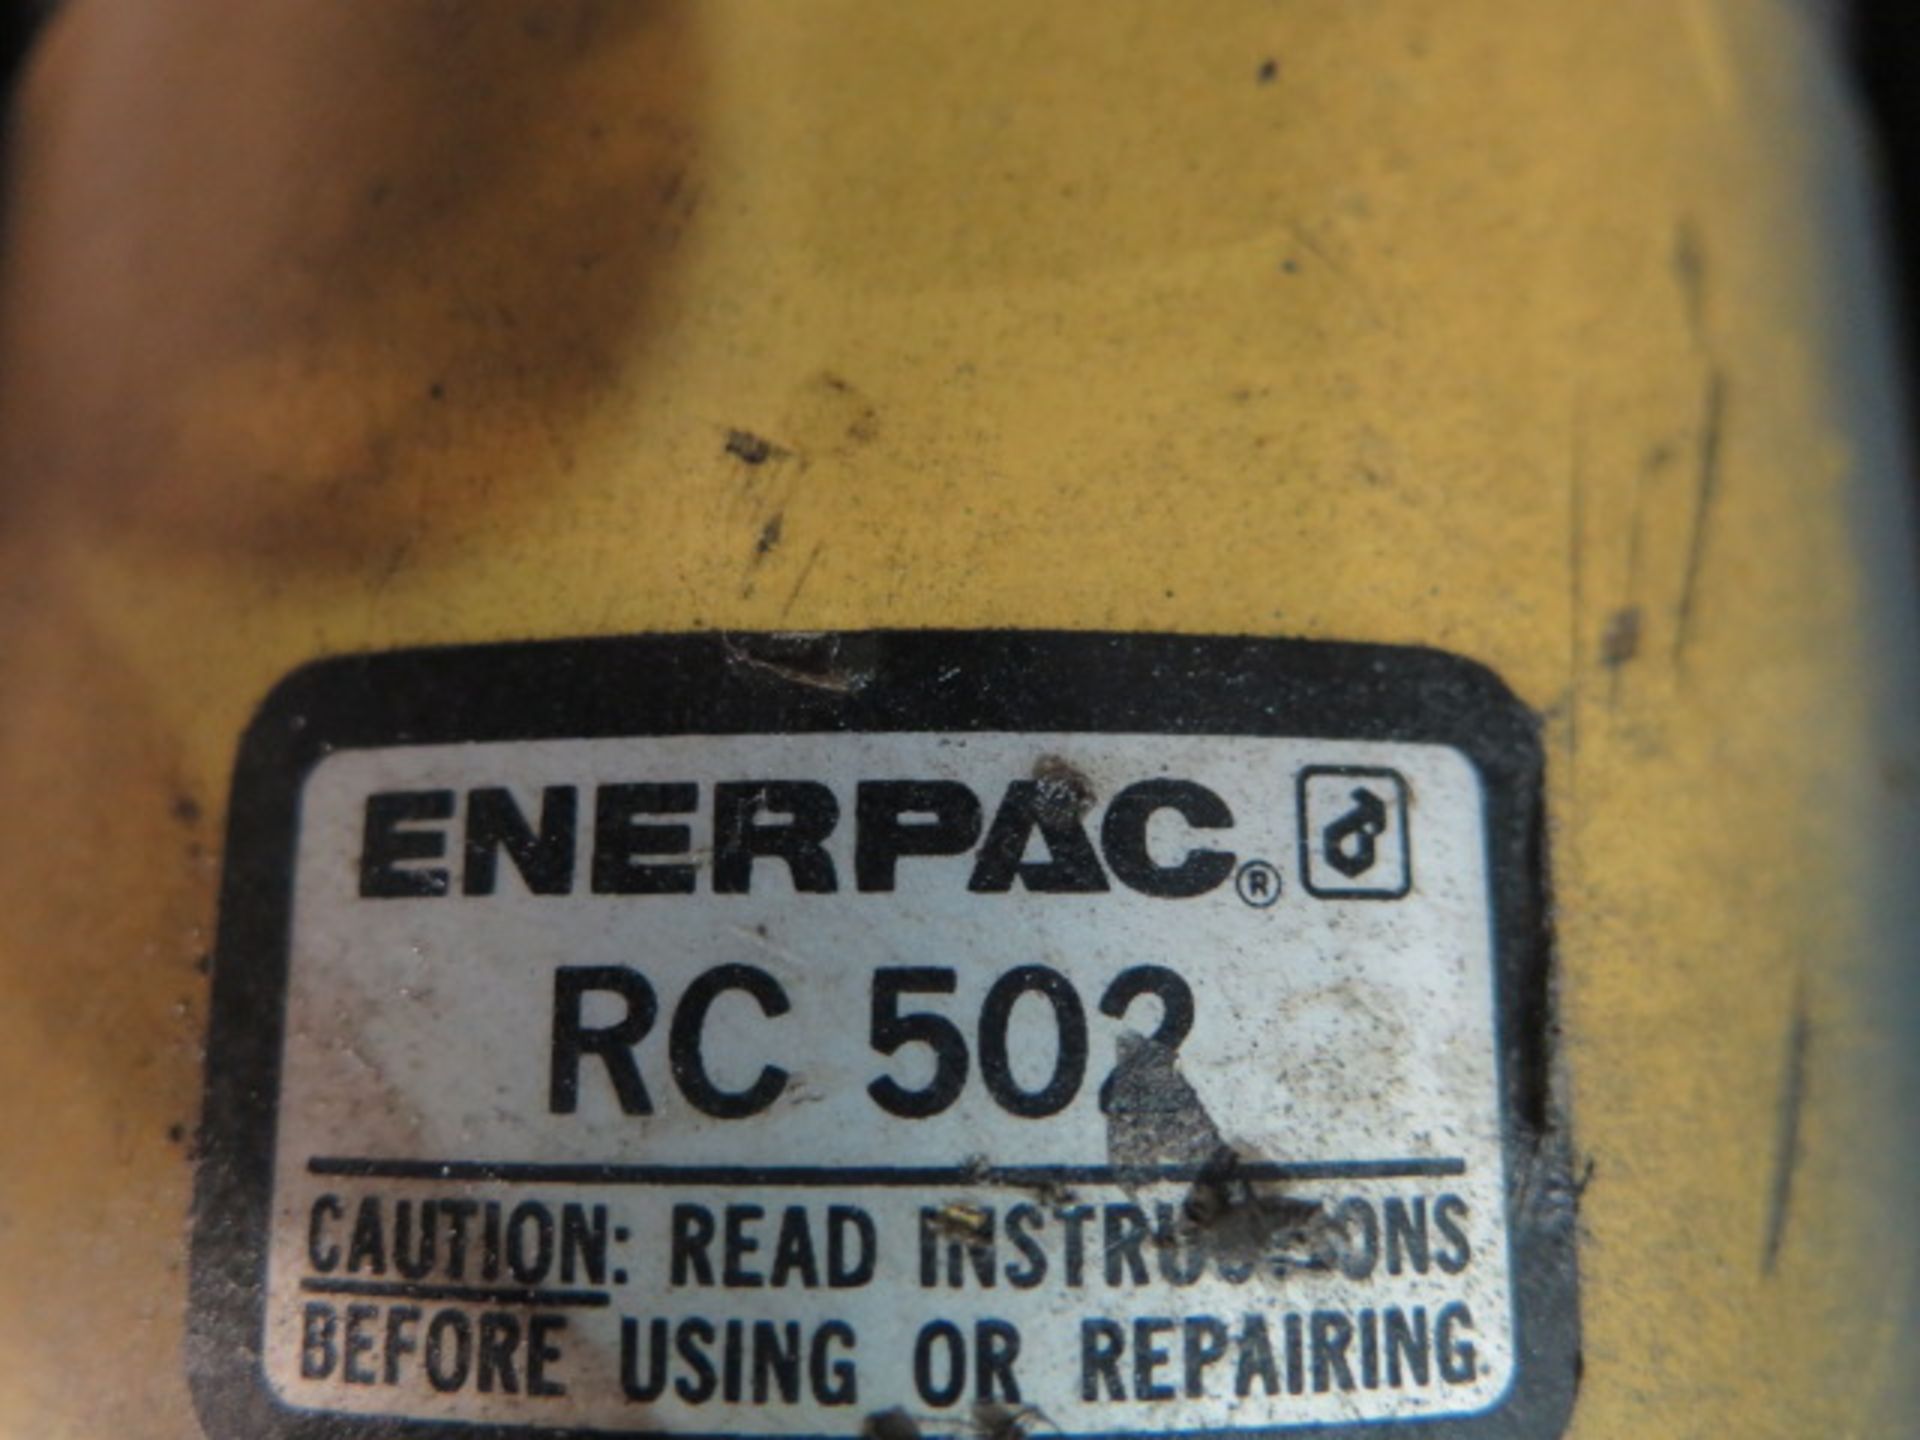 Enerpac 3” x 3” Hydraulic Corner Notcher w/ 26” Throat (AT TIP), Rolling Stand - Image 8 of 8